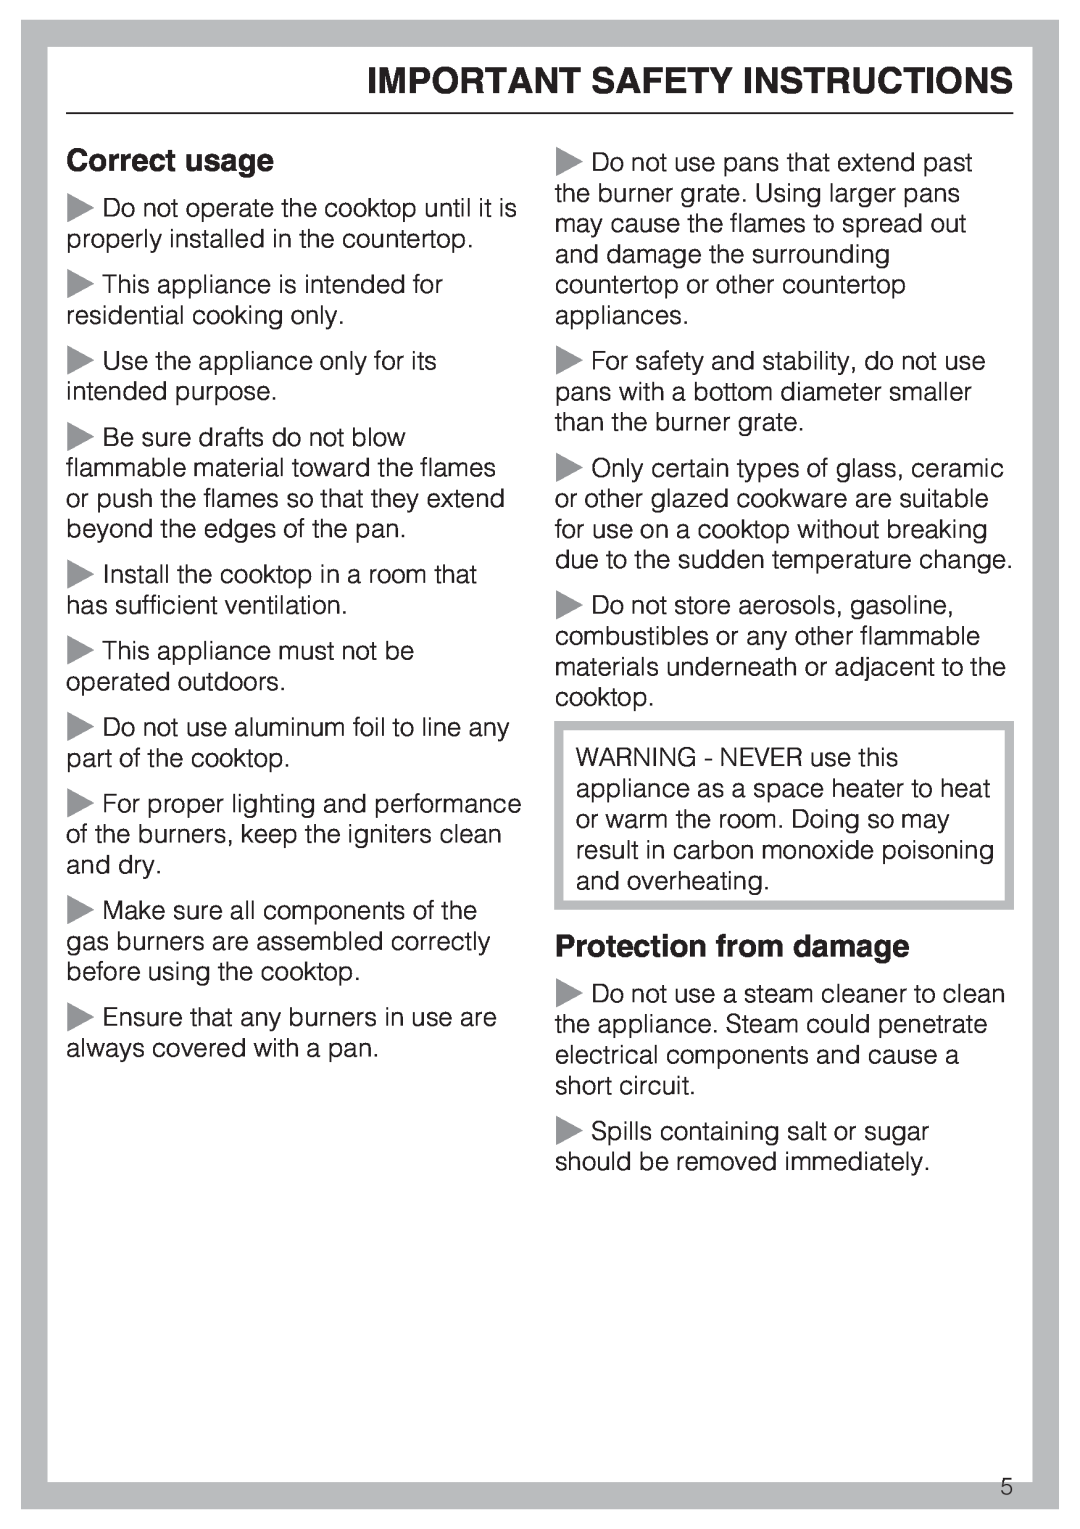 Miele KM 360 operating instructions Correct usage, Protection from damage, Important Safety Instructions 